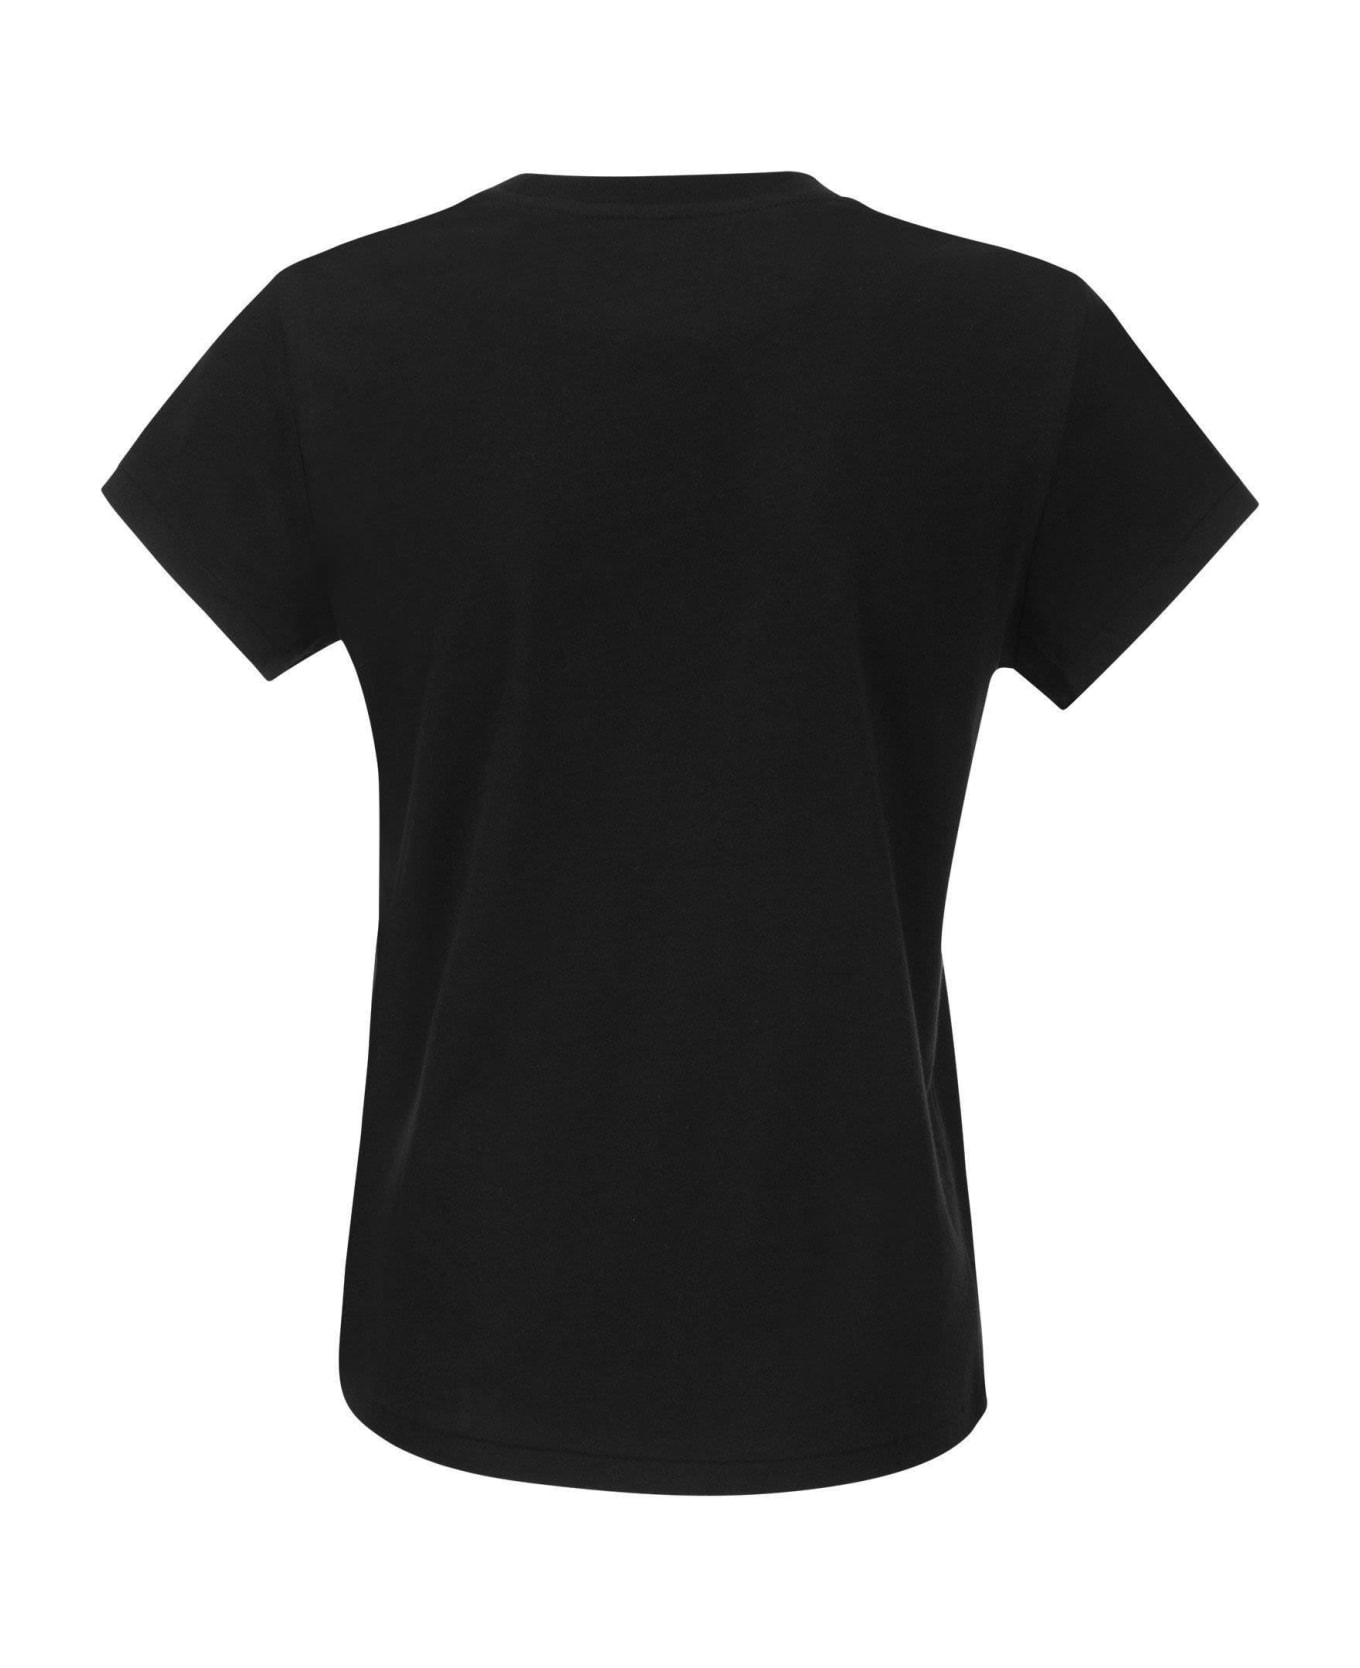 Polo Ralph Lauren Black T-shirt With Contrasting Pony - Black